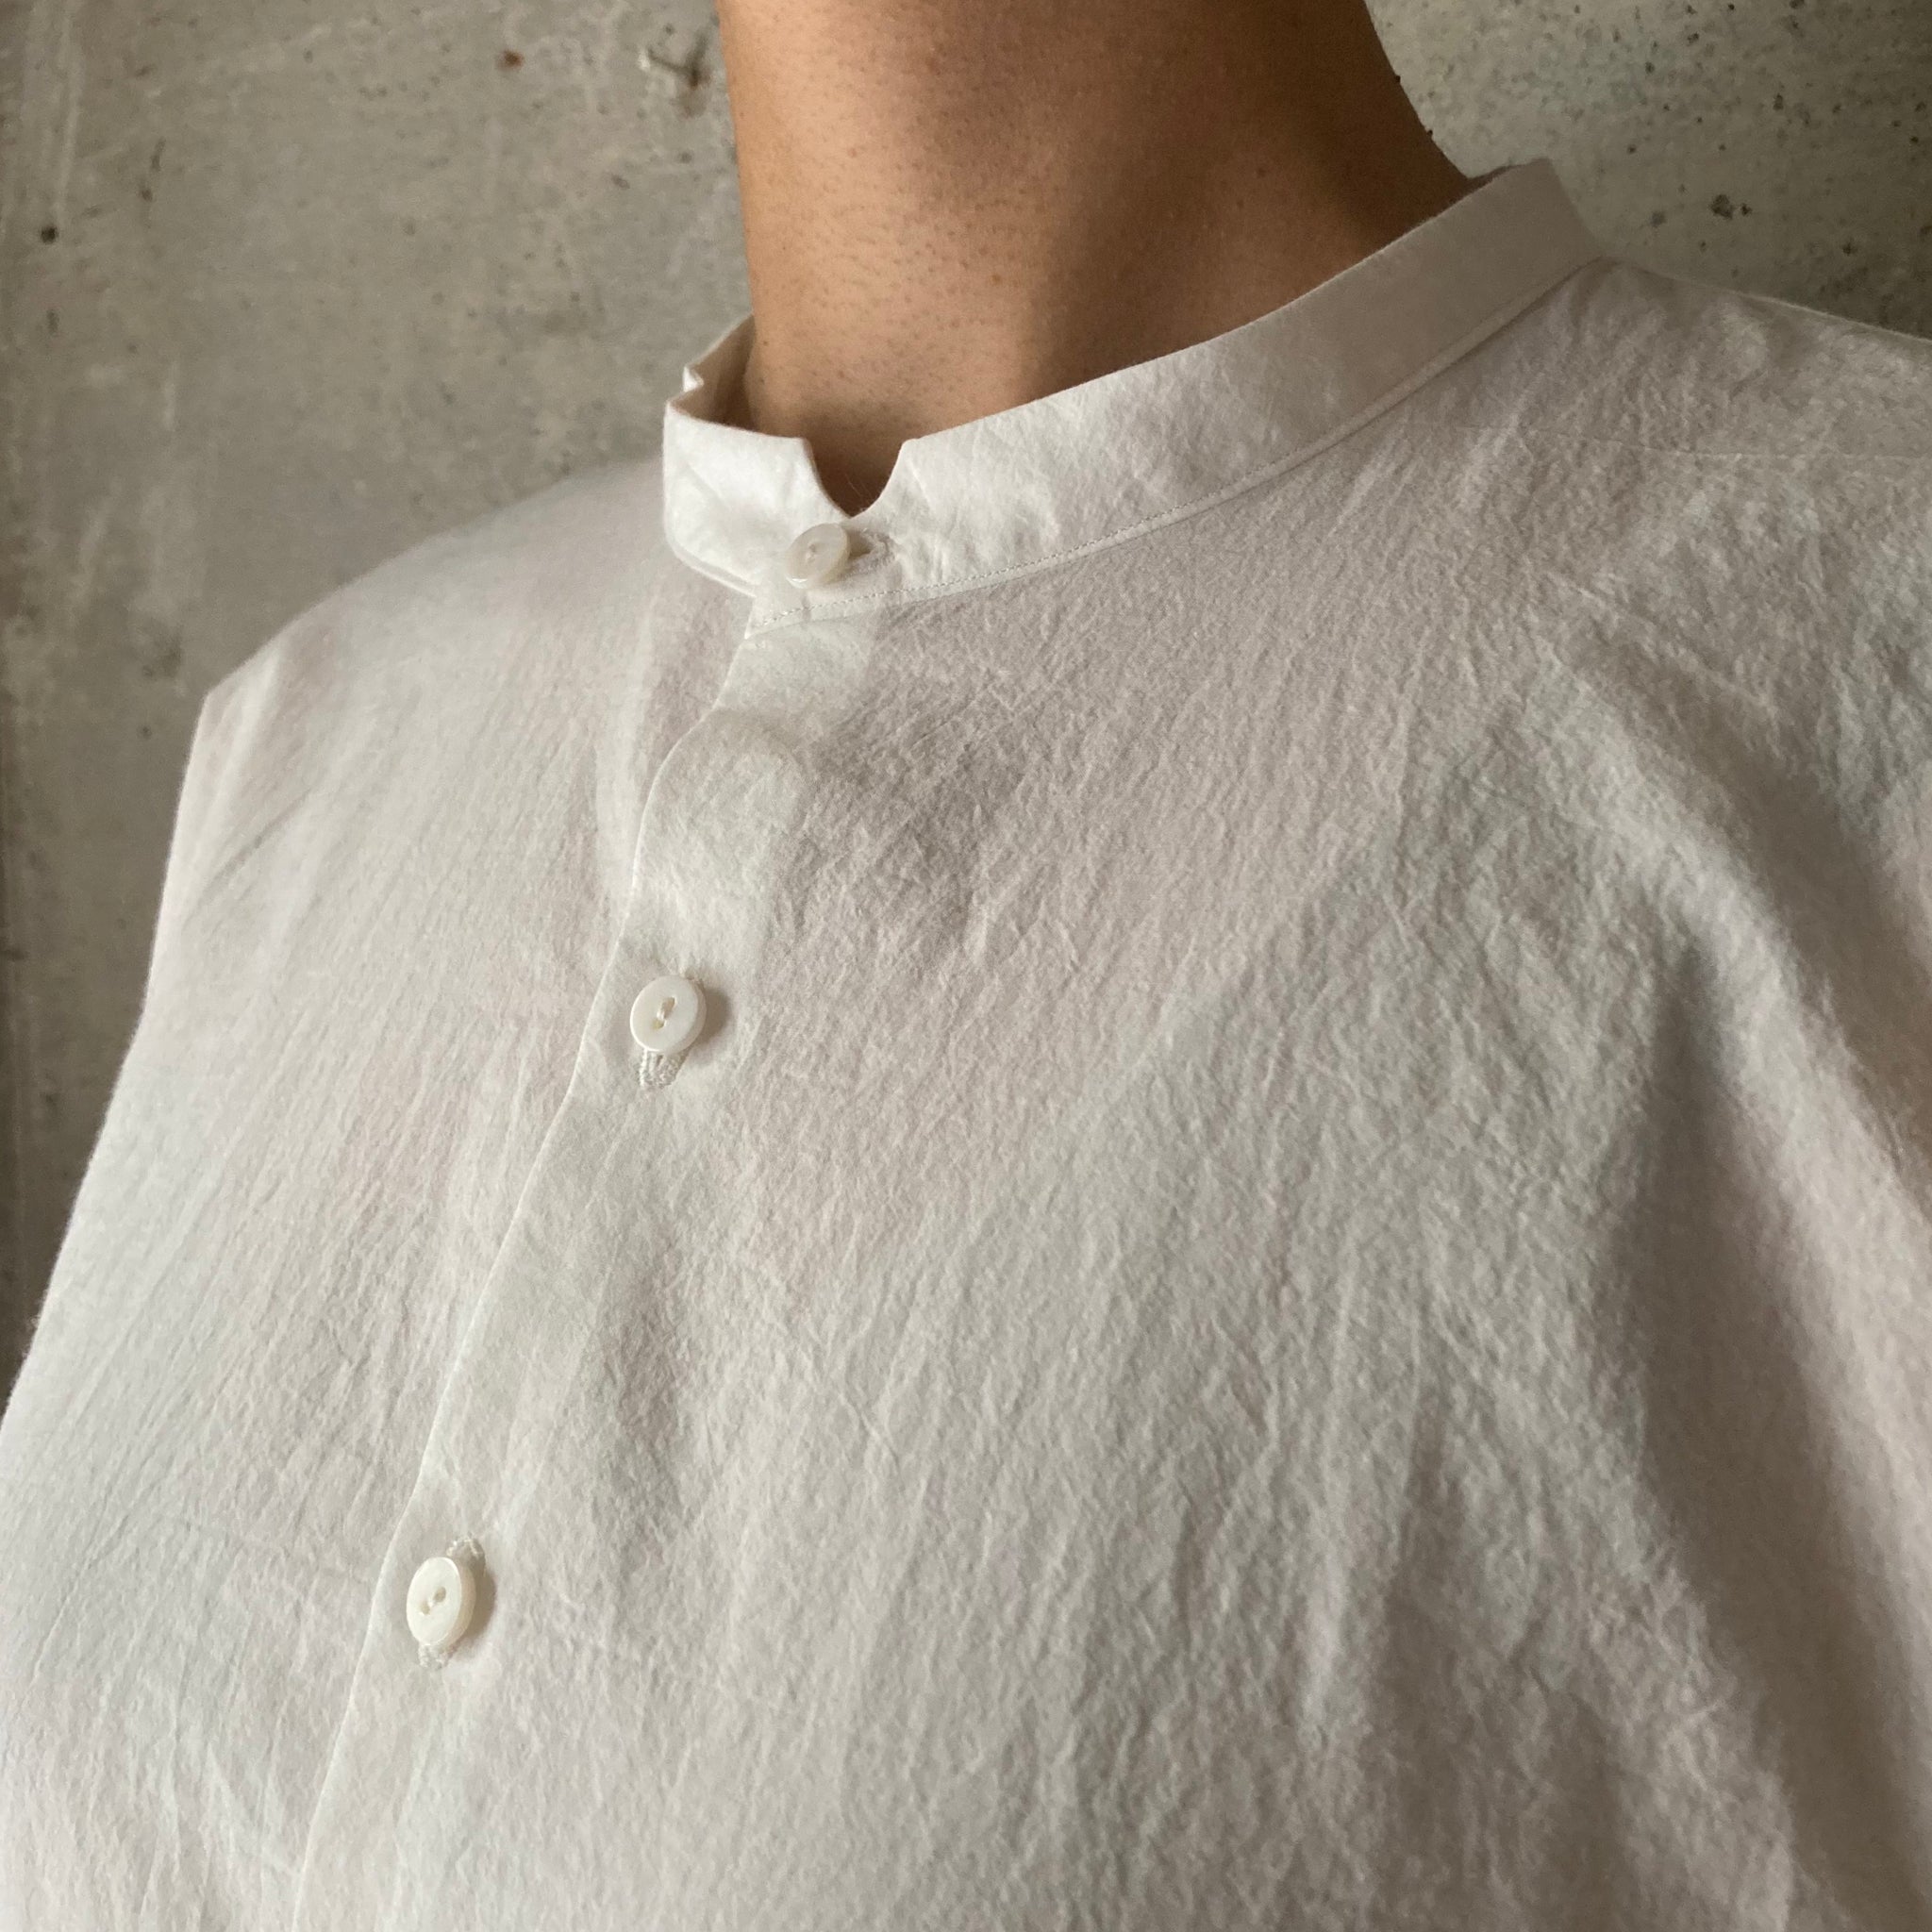 klause | クロイゼ | L-S Pull-over shirts | Loose fit